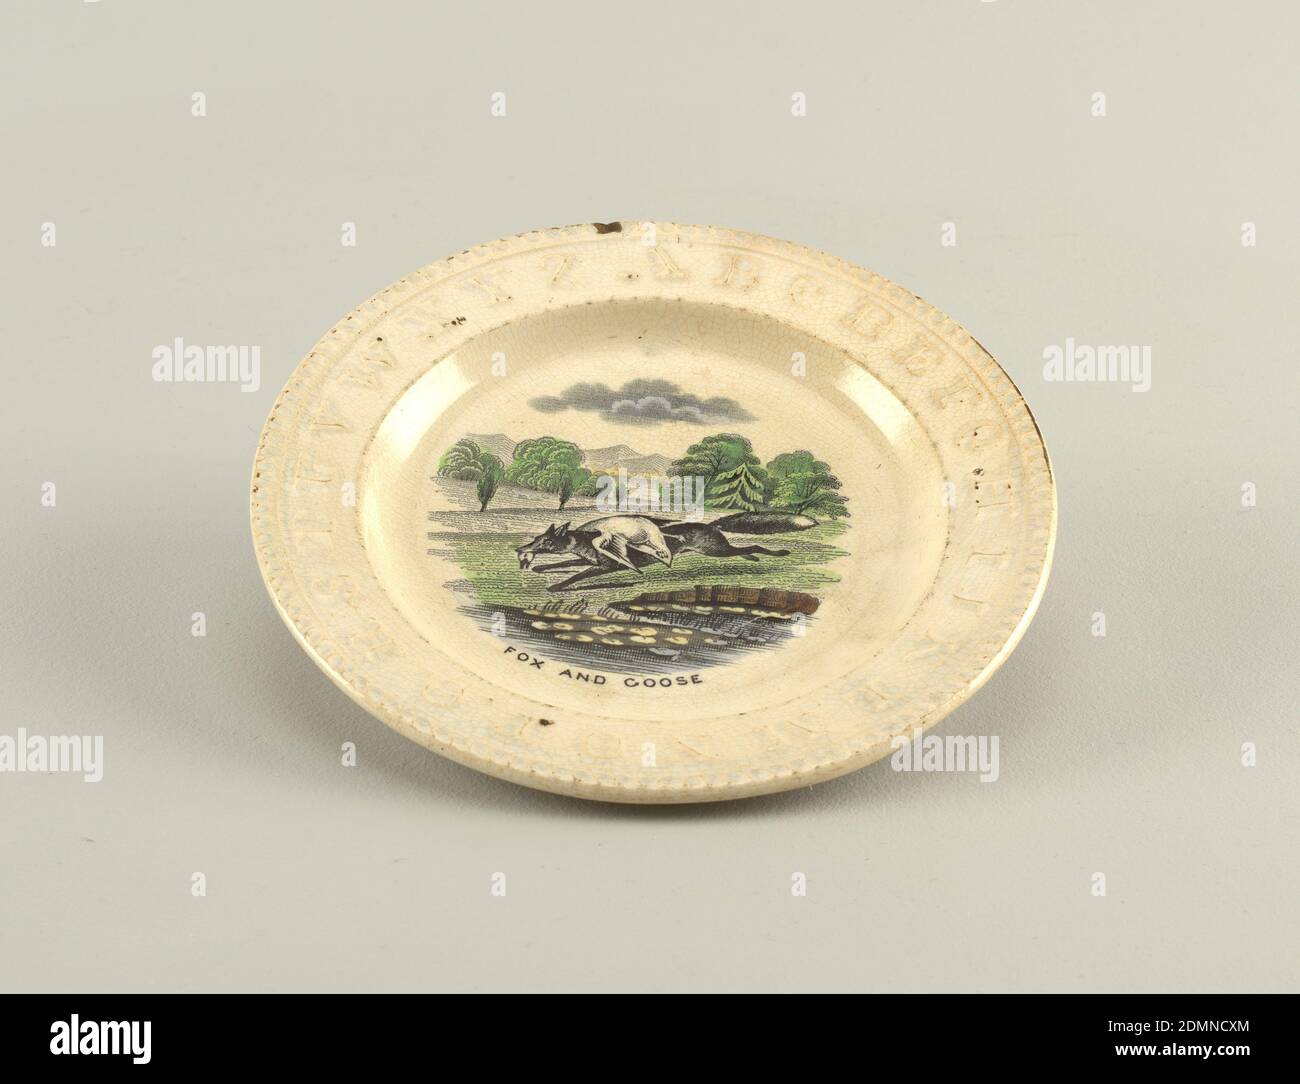 Plate, Creamware with underglaze transfer printing and painting, A and B, with flat marly bearing the alphabet in relief and rope molding on rim. Hand-colored transfer-print of 'Fox and Goose.', USA, late 19th century, ceramics, Decorative Arts, Plate Stock Photo